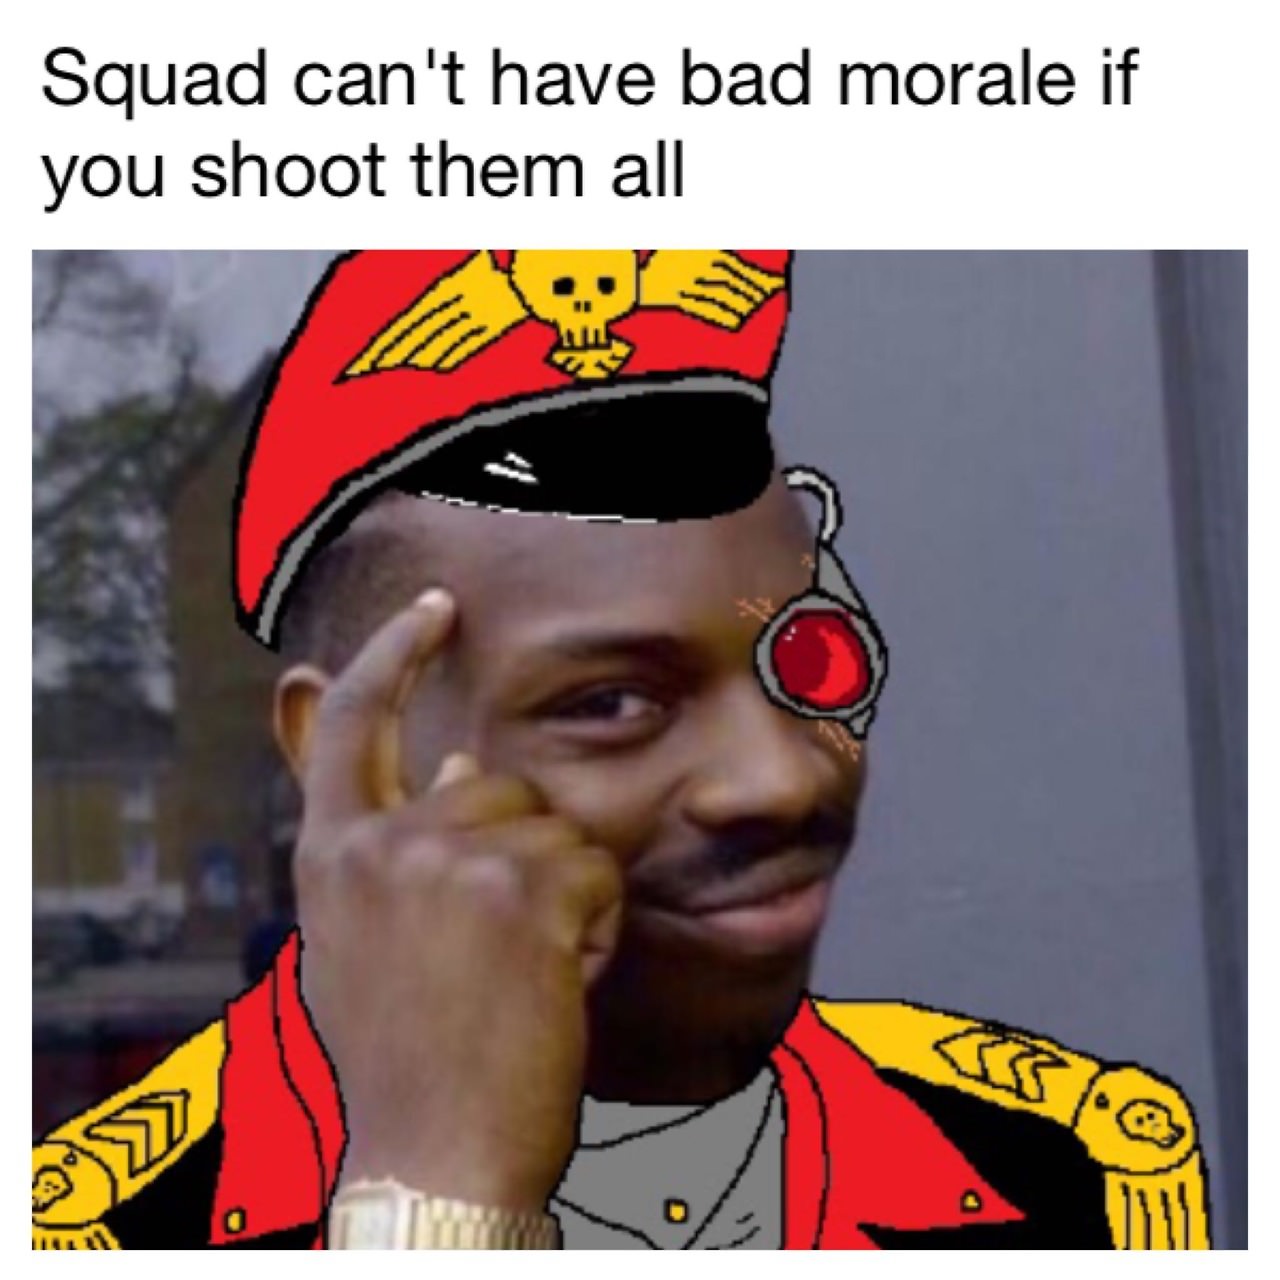 it's not rape if she doesn t say no - Squad can't have bad morale if you shoot them all